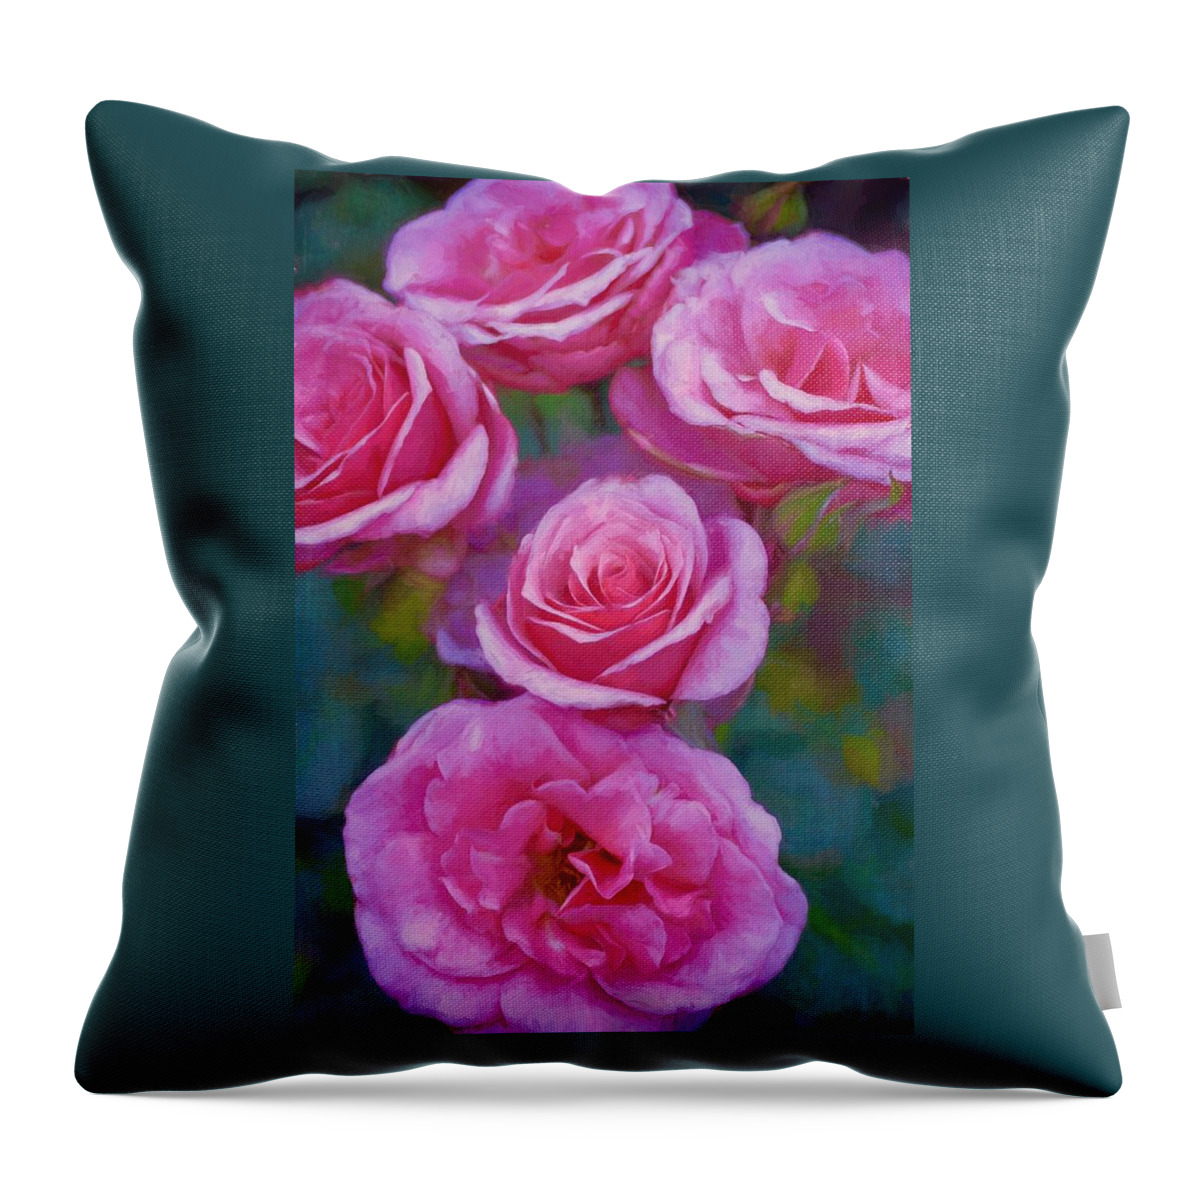 Floral Throw Pillow featuring the photograph Rose 344 by Pamela Cooper